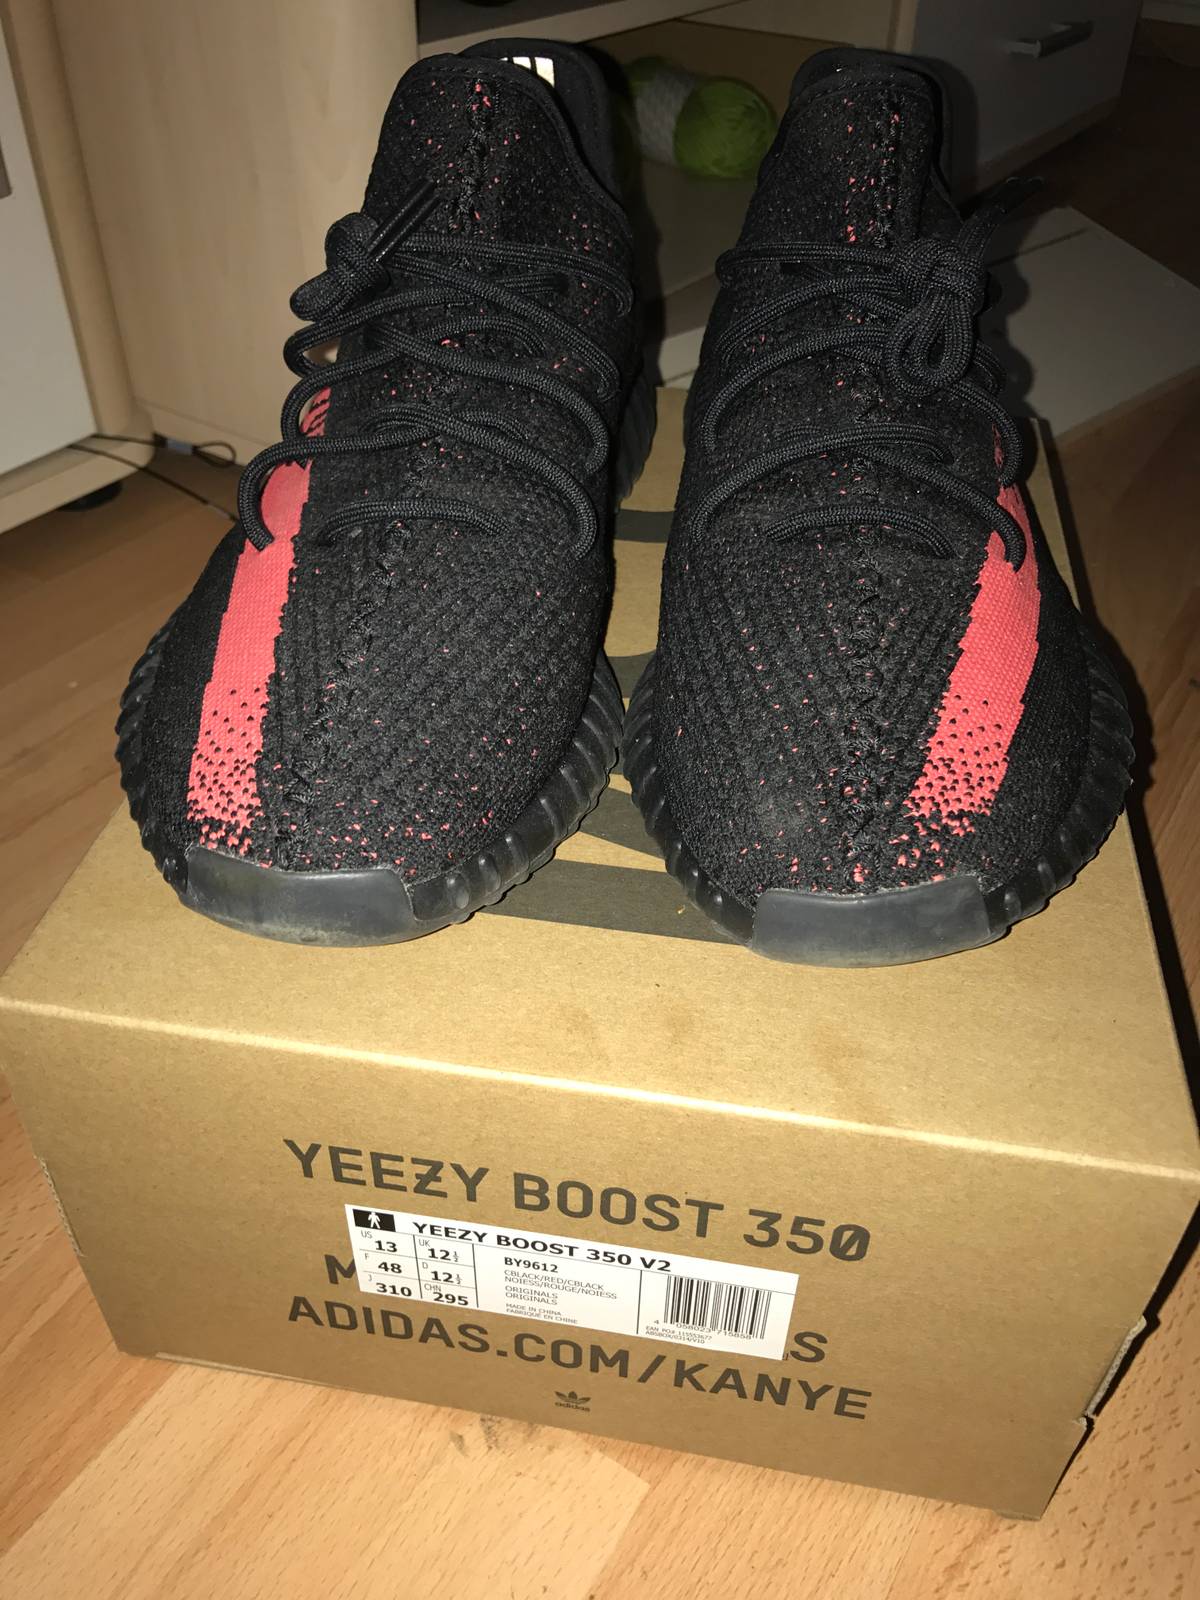 Adidas Yeezy 350 v2 Boost Low 'Black Solar Red' 2017 CP 9652